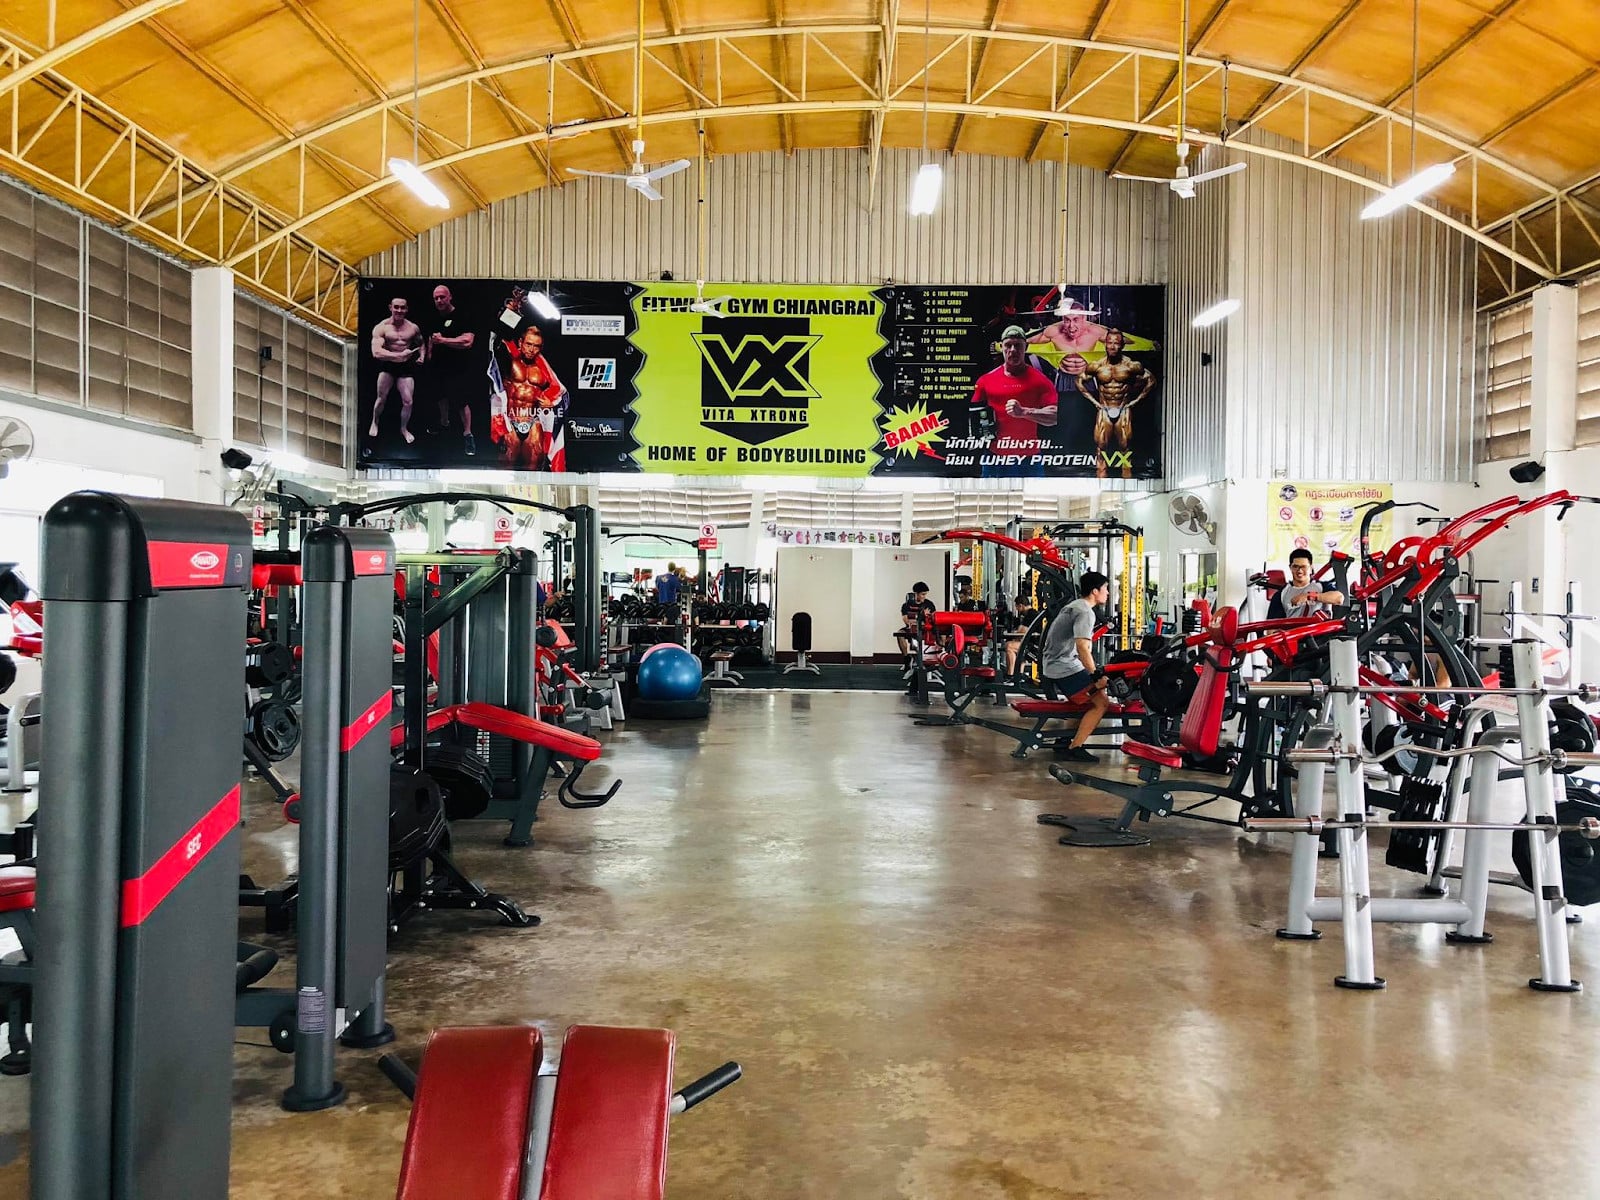 The Fitwhey gym in Chiang Rai